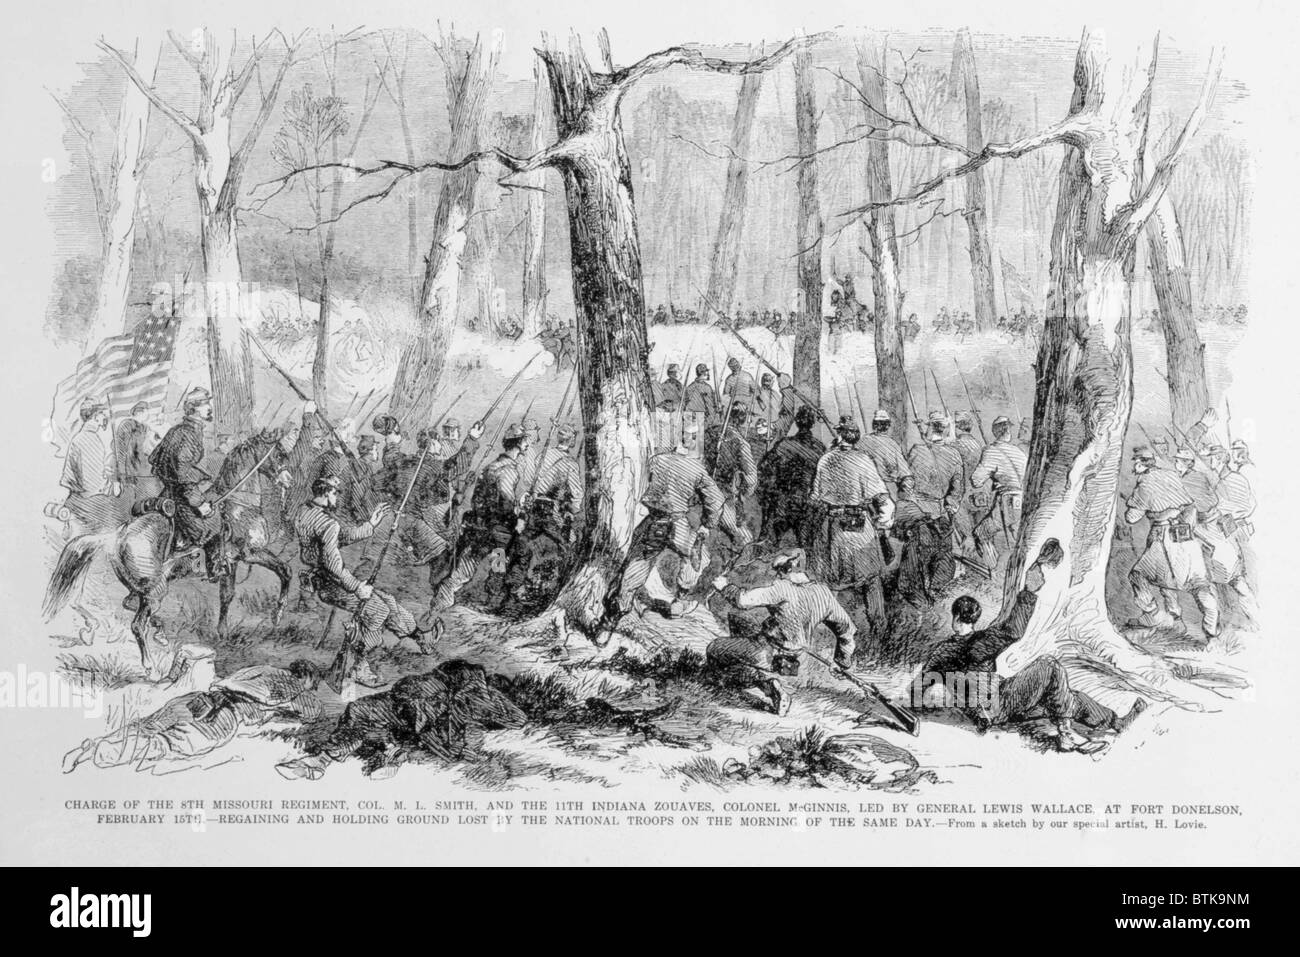 Charge of the 9th Missouri Regiment and 11th Indiana Zouaves at Fort Donelson, February 15, 1861 Stock Photo